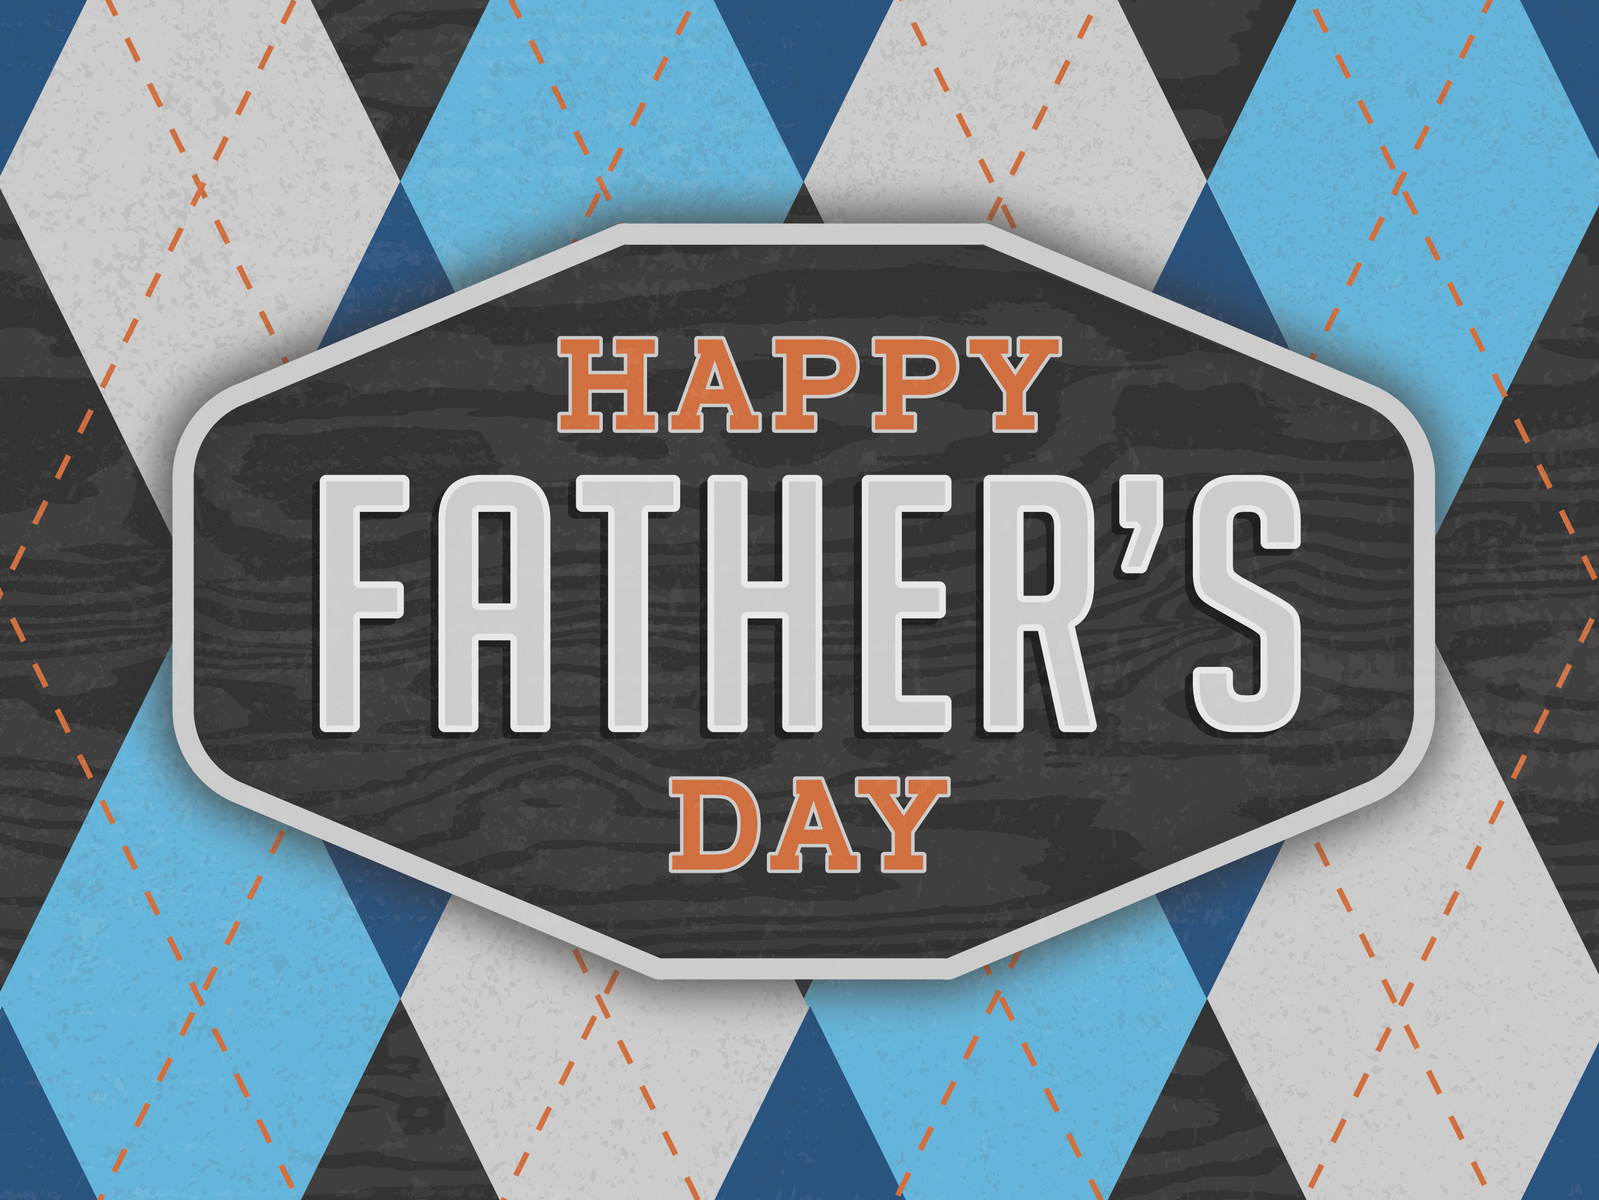 Happy Fathers Day by Amy Crowder on Dribbble